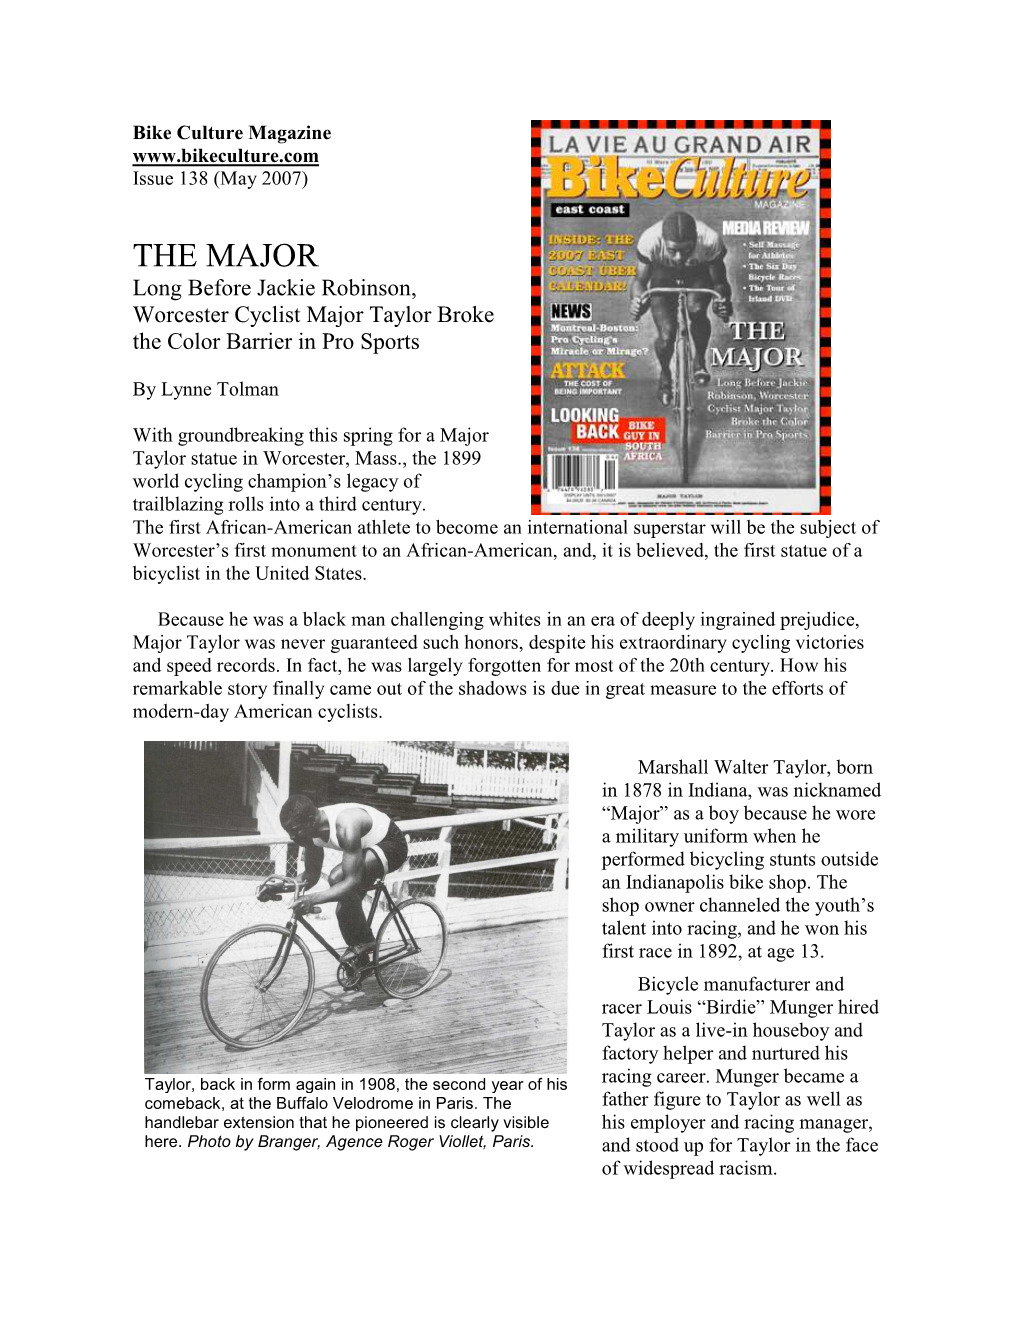 THE MAJOR Long Before Jackie Robinson, Worcester Cyclist Major Taylor Broke the Color Barrier in Pro Sports